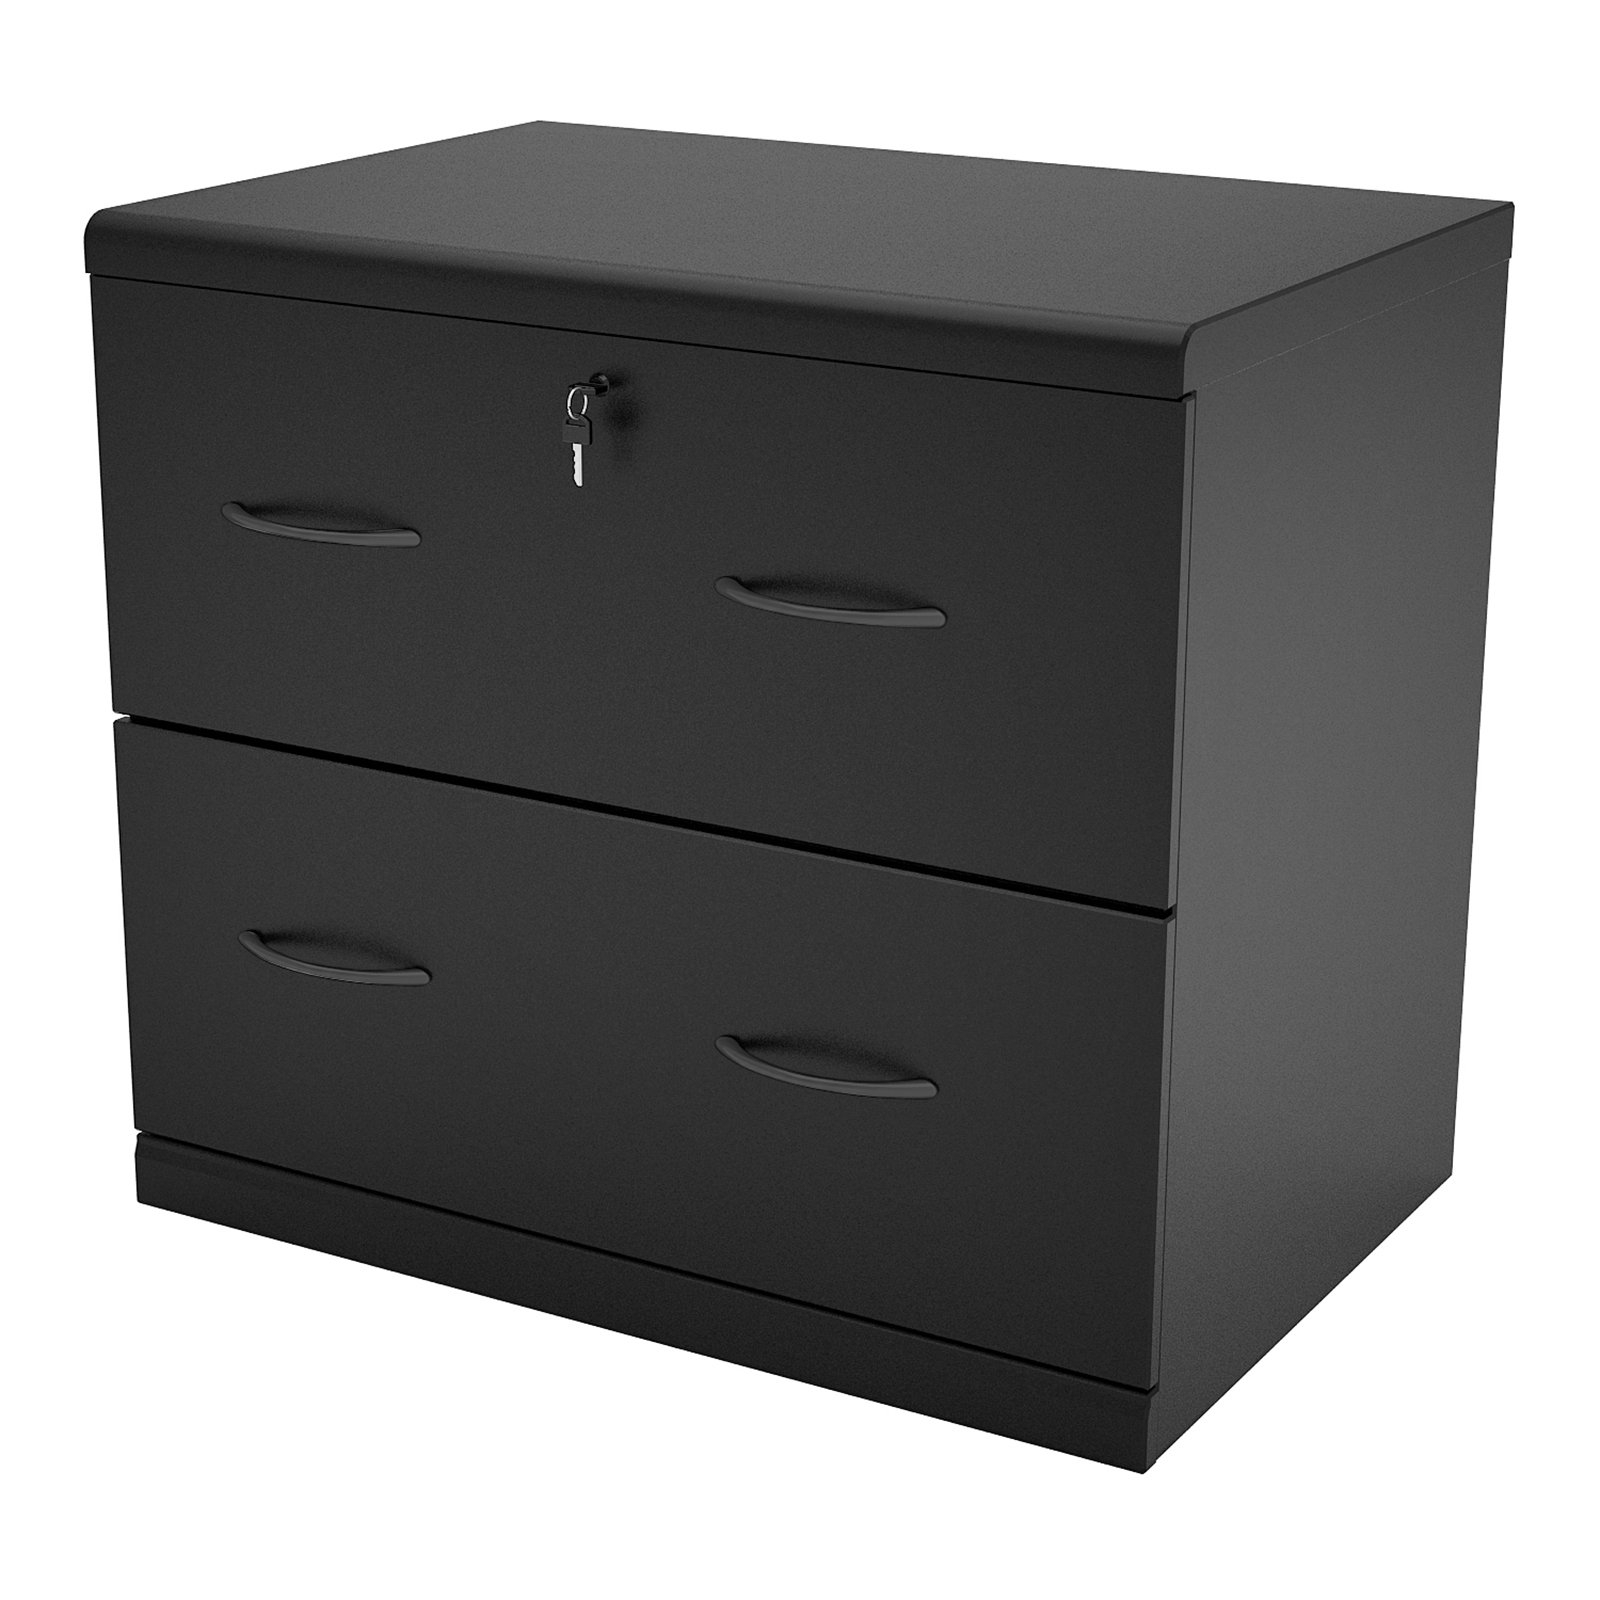 2 Drawer Lateral Wood Lockable Filing Cabinet Black Walmart for proportions 1600 X 1600